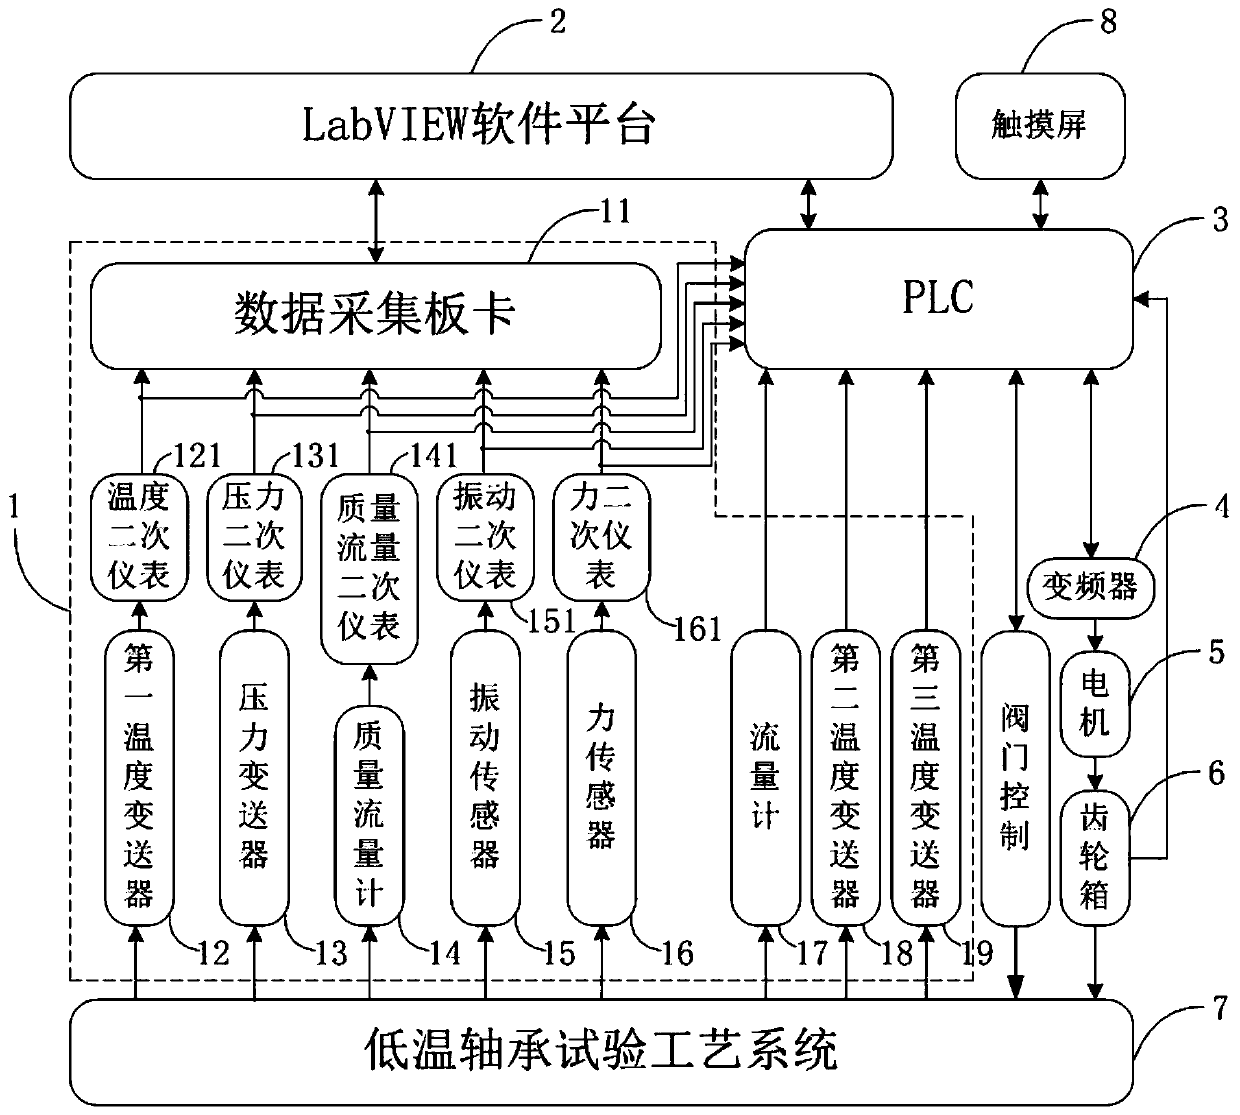 Low-temperature bearing test measurement and control system